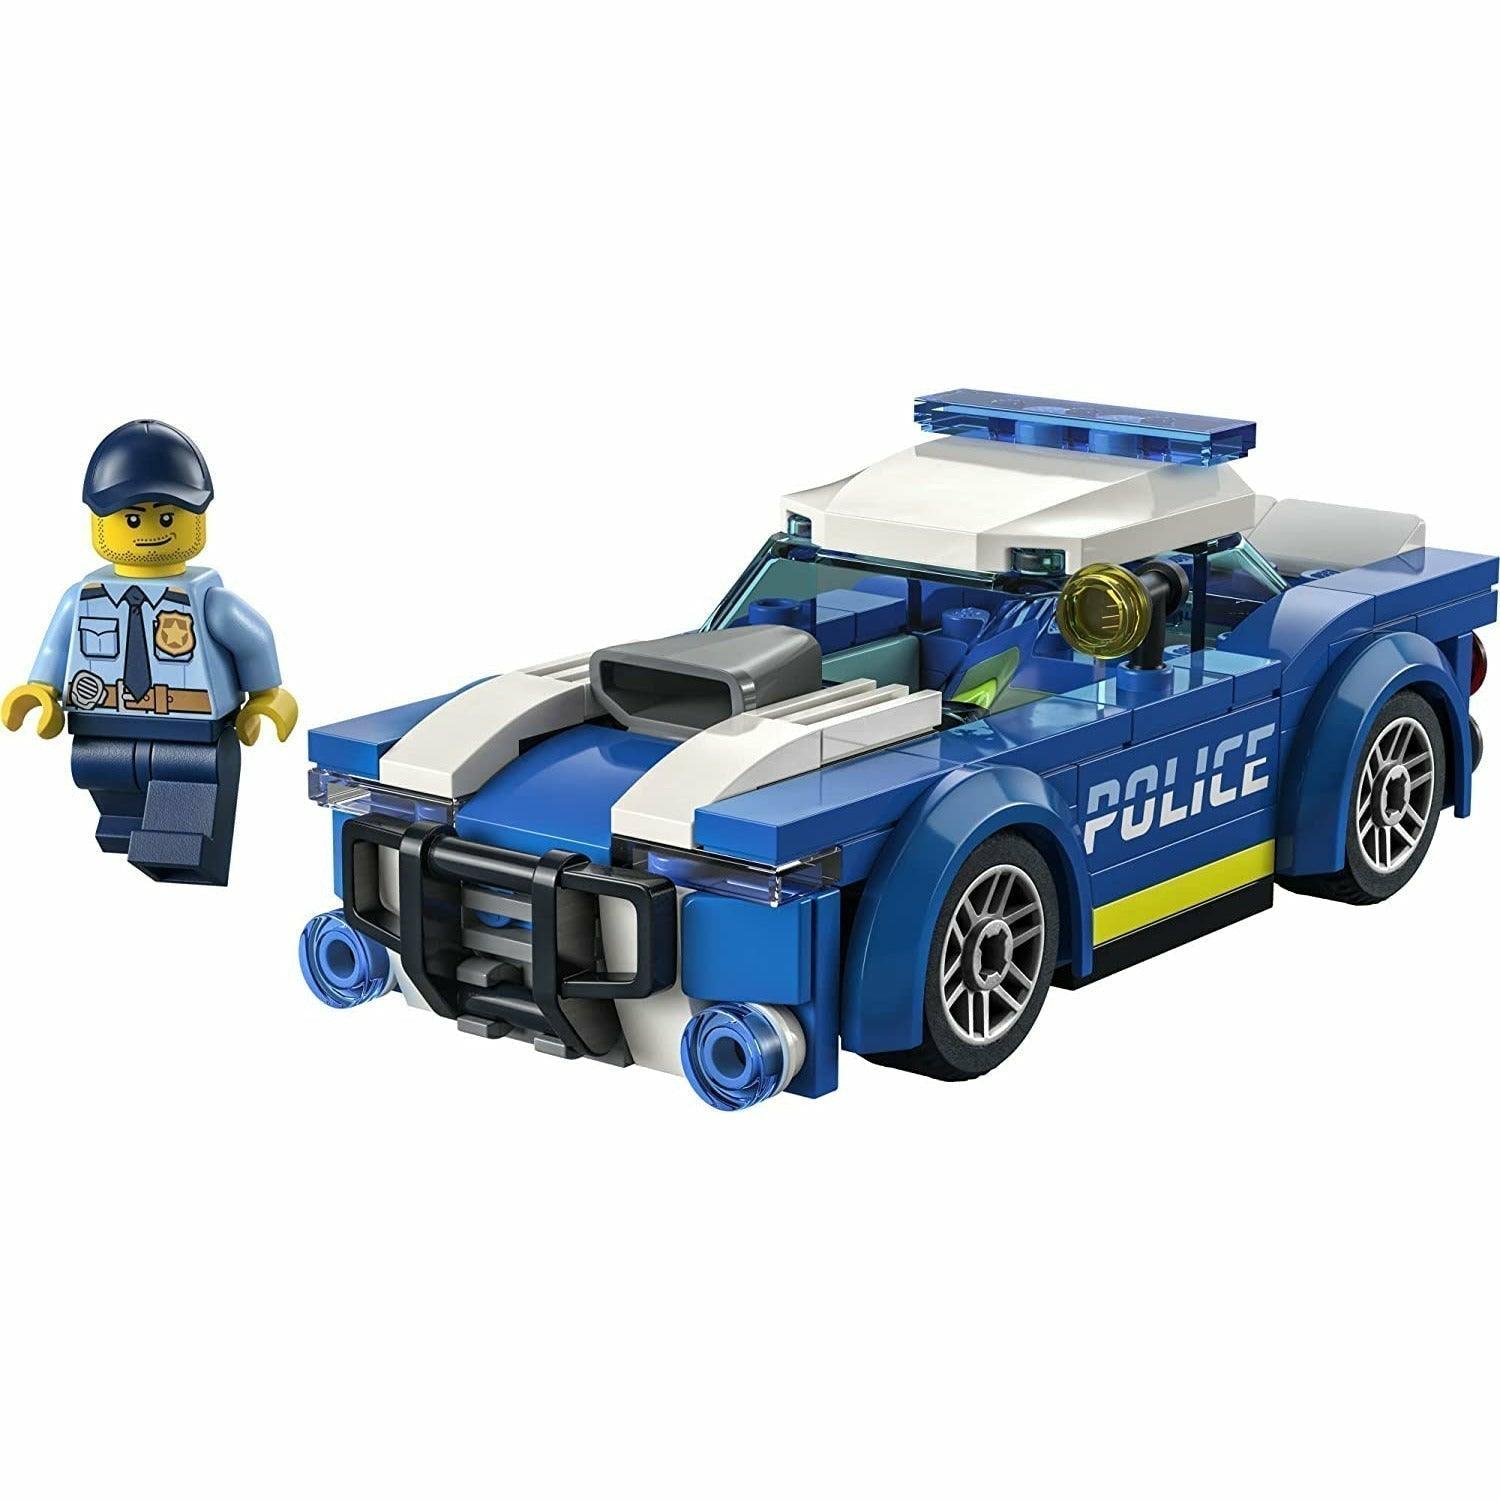 LEGO City Police Car 60312 Building Kit Includes a Police Officer Minifigure with a Toy Flashlight and a Police Cap (94 Pieces) - BumbleToys - 4+ Years, 5-7 Years, 6+ Years, Boys, Cars, City, EXO, LEGO, Pre-Order